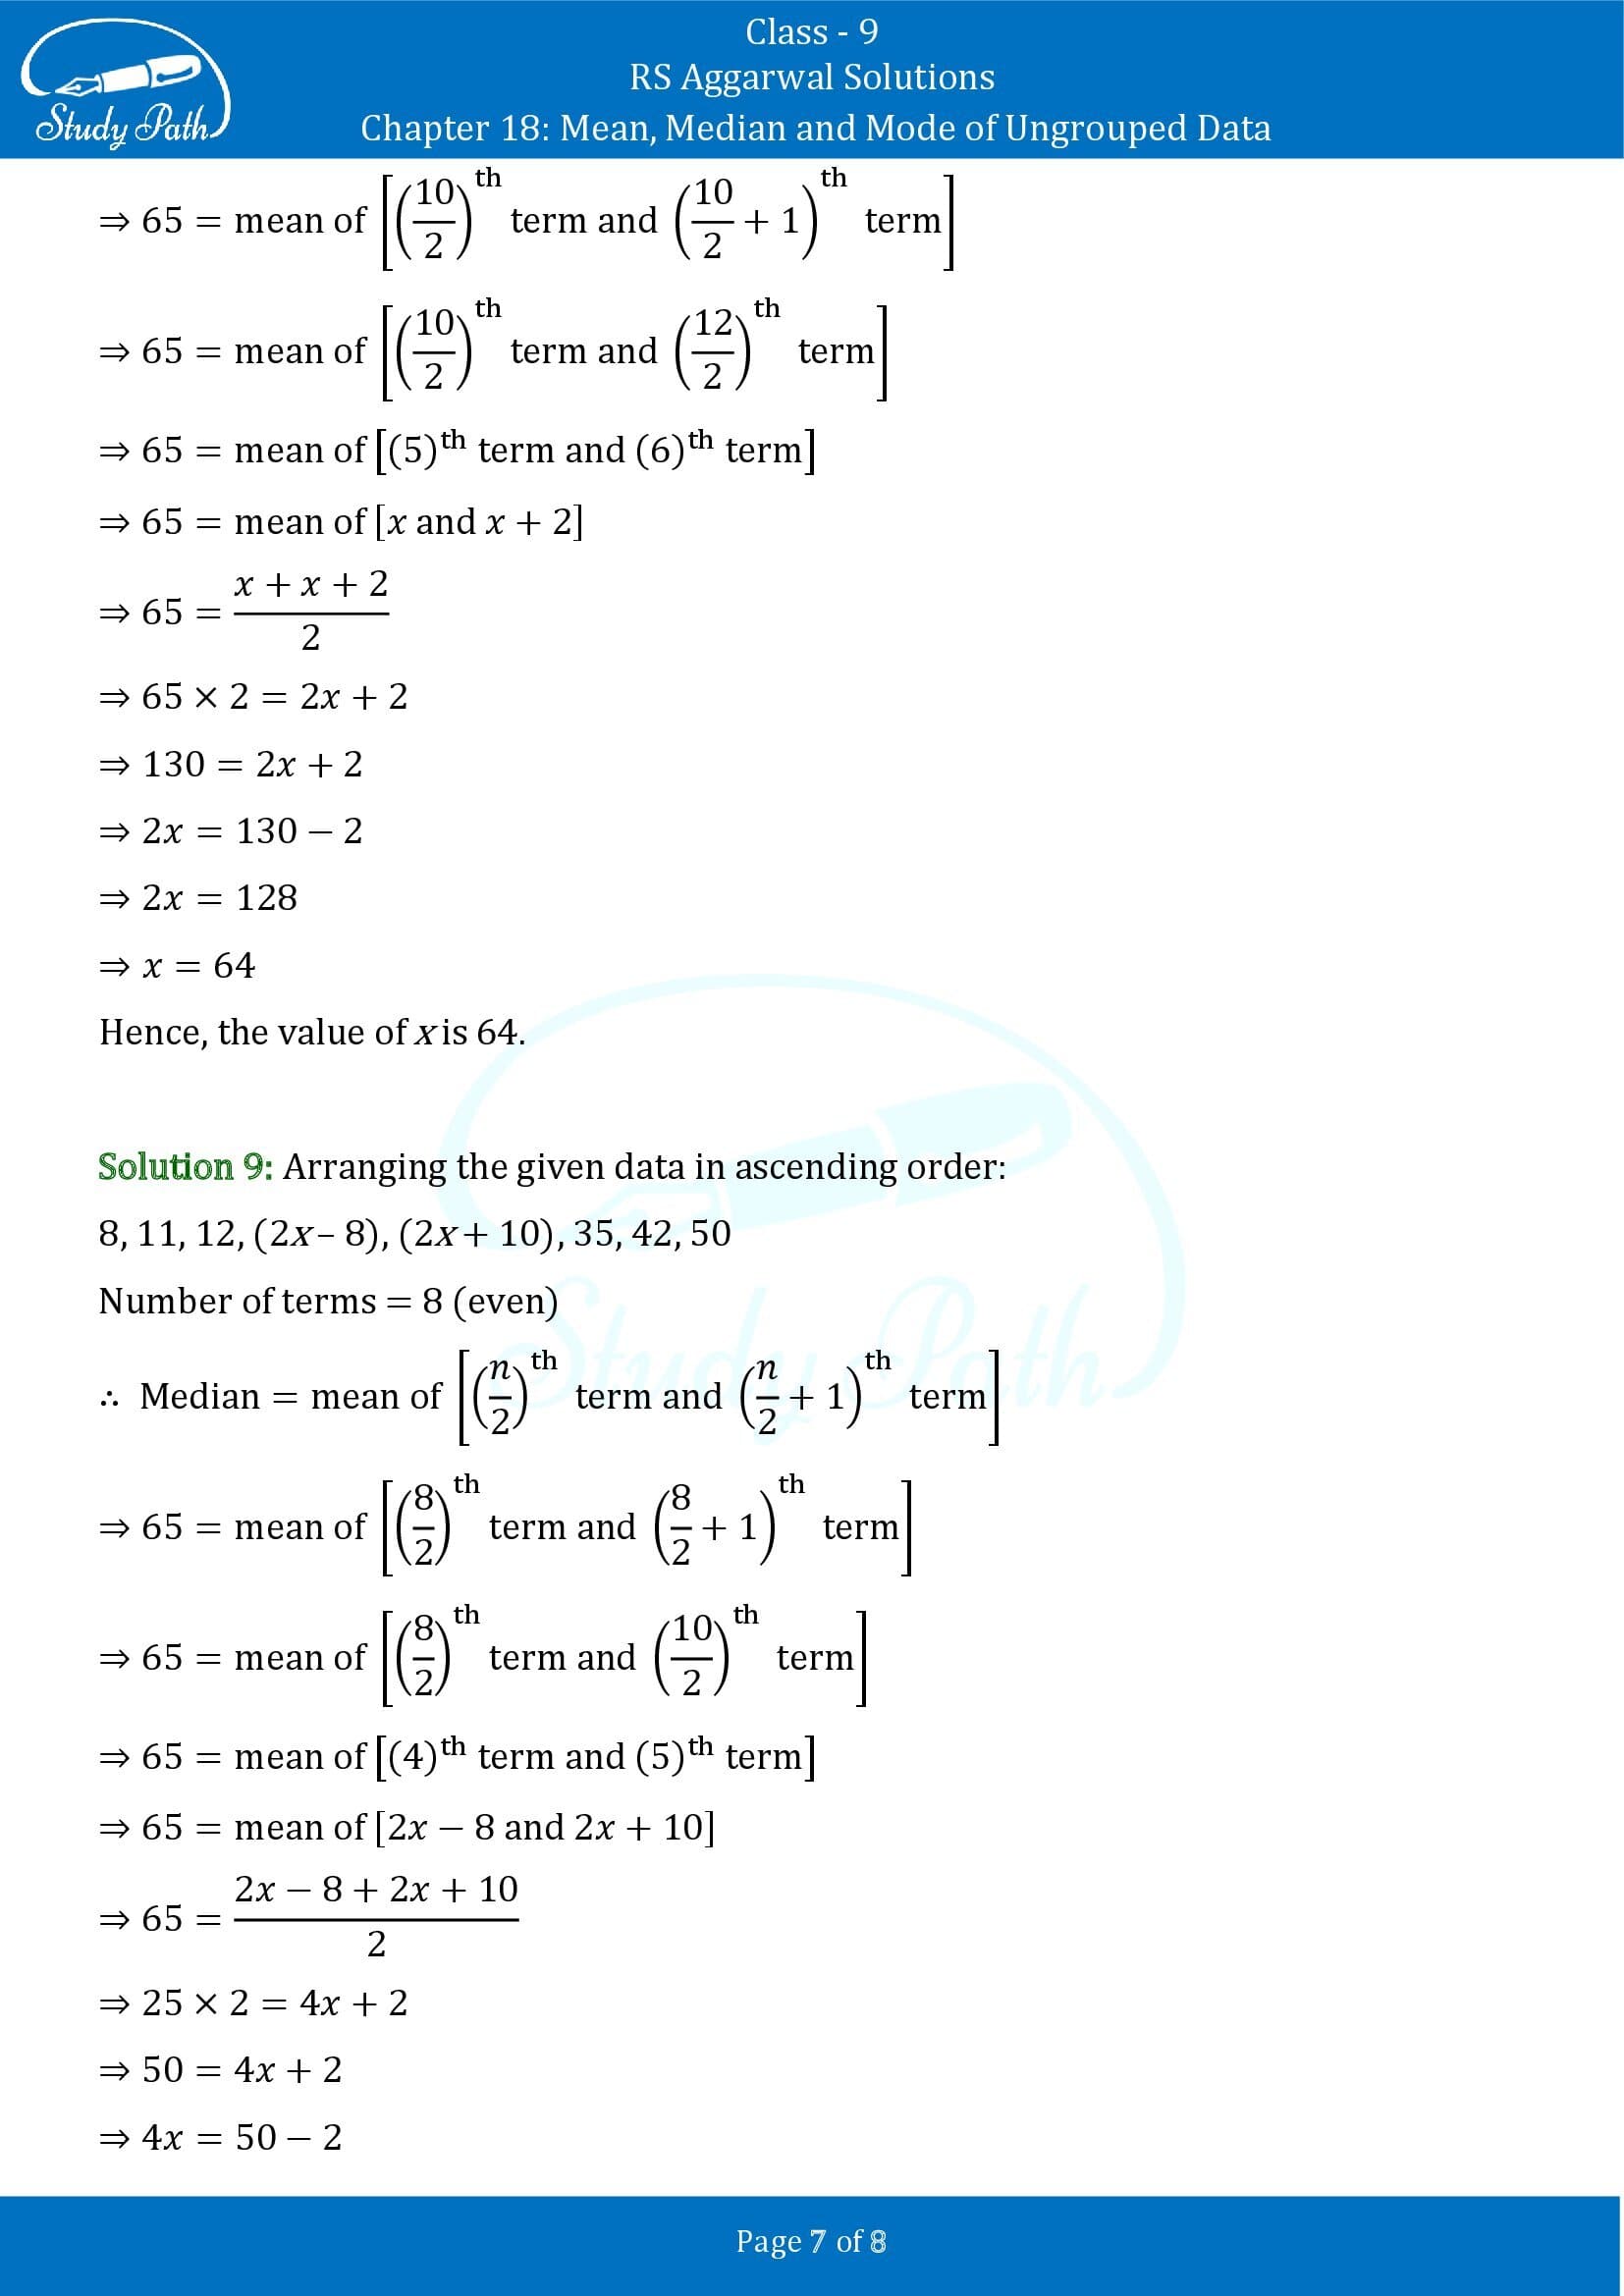 RS Aggarwal Solutions Class 9 Chapter 18 Mean Median and Mode of Ungrouped Data Exercise 18C 0007